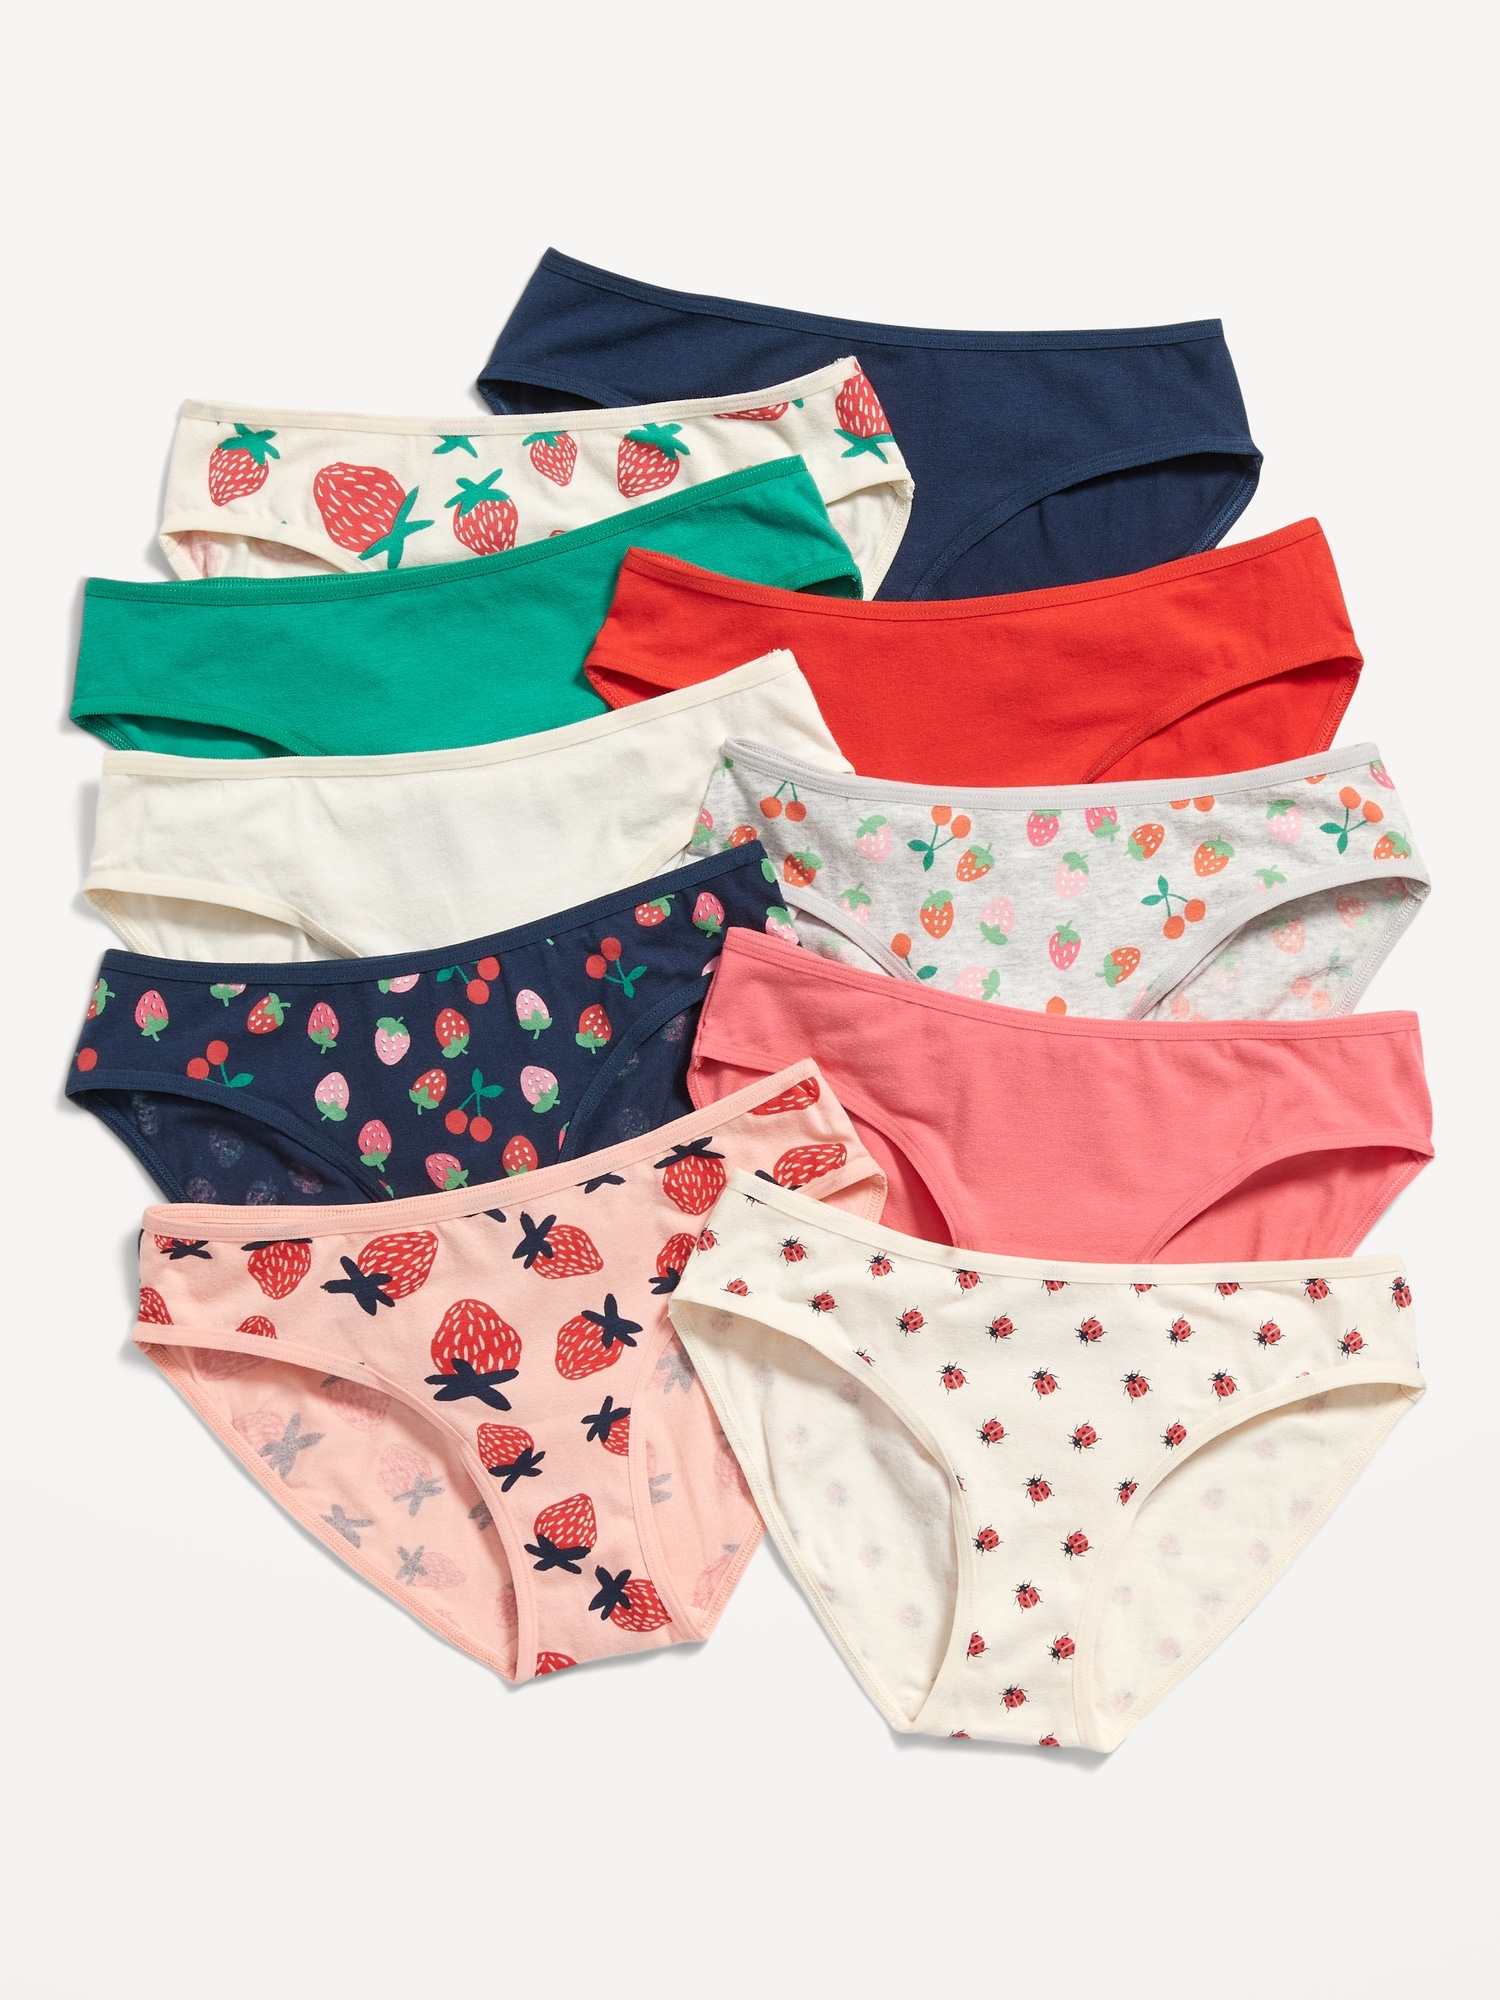 Old Navy Stretch-to-Fit Bikini Underwear 10-Pack for Girls pink. 1